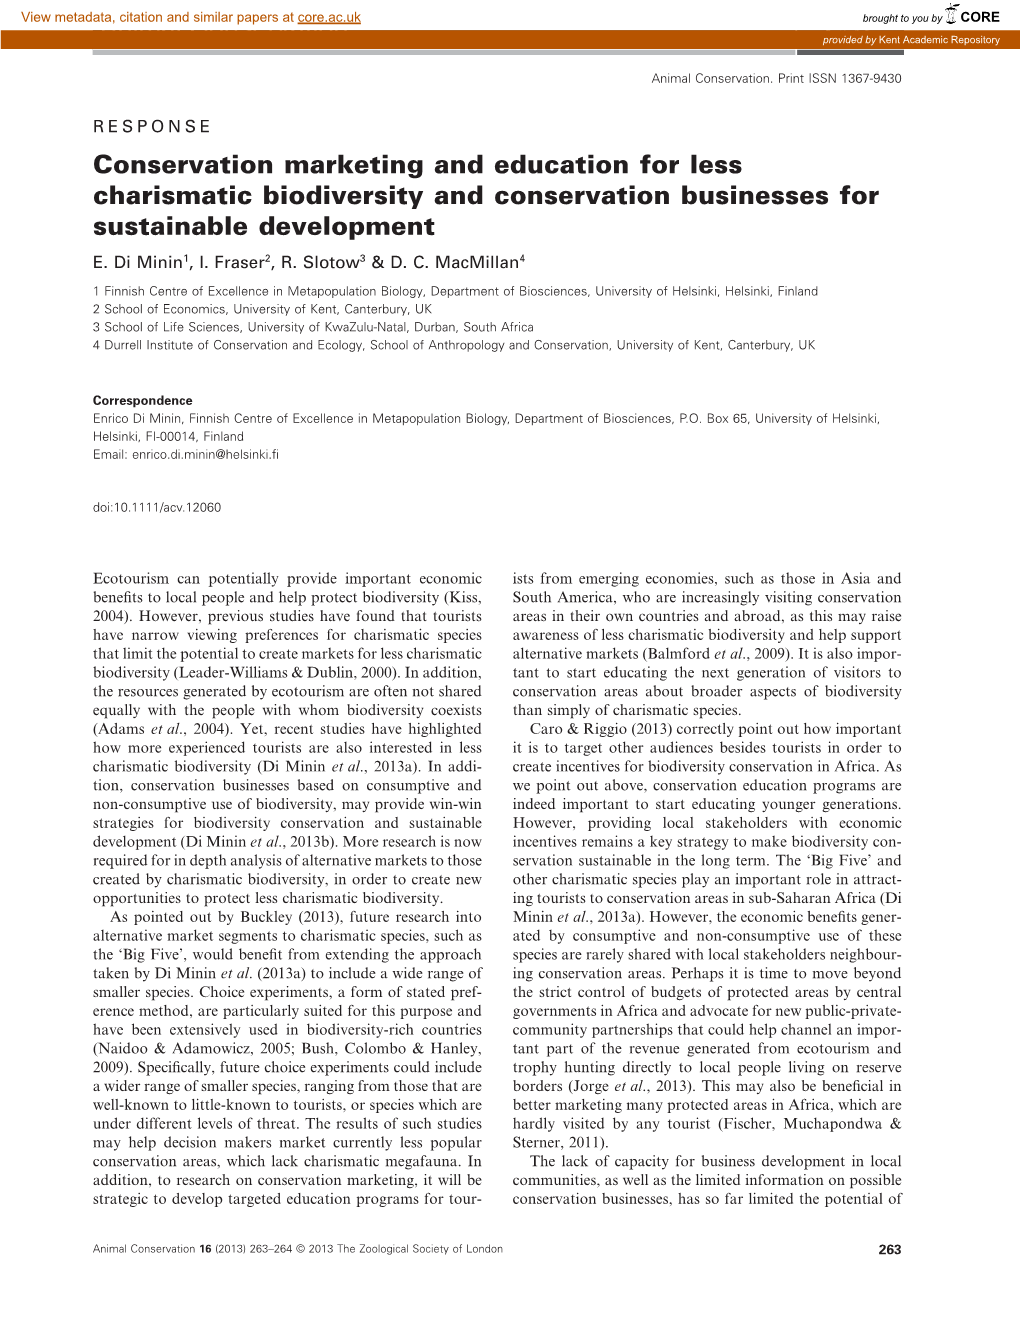 Conservation Marketing and Education for Less Charismatic Biodiversity and Conservation Businesses for Sustainable Development E